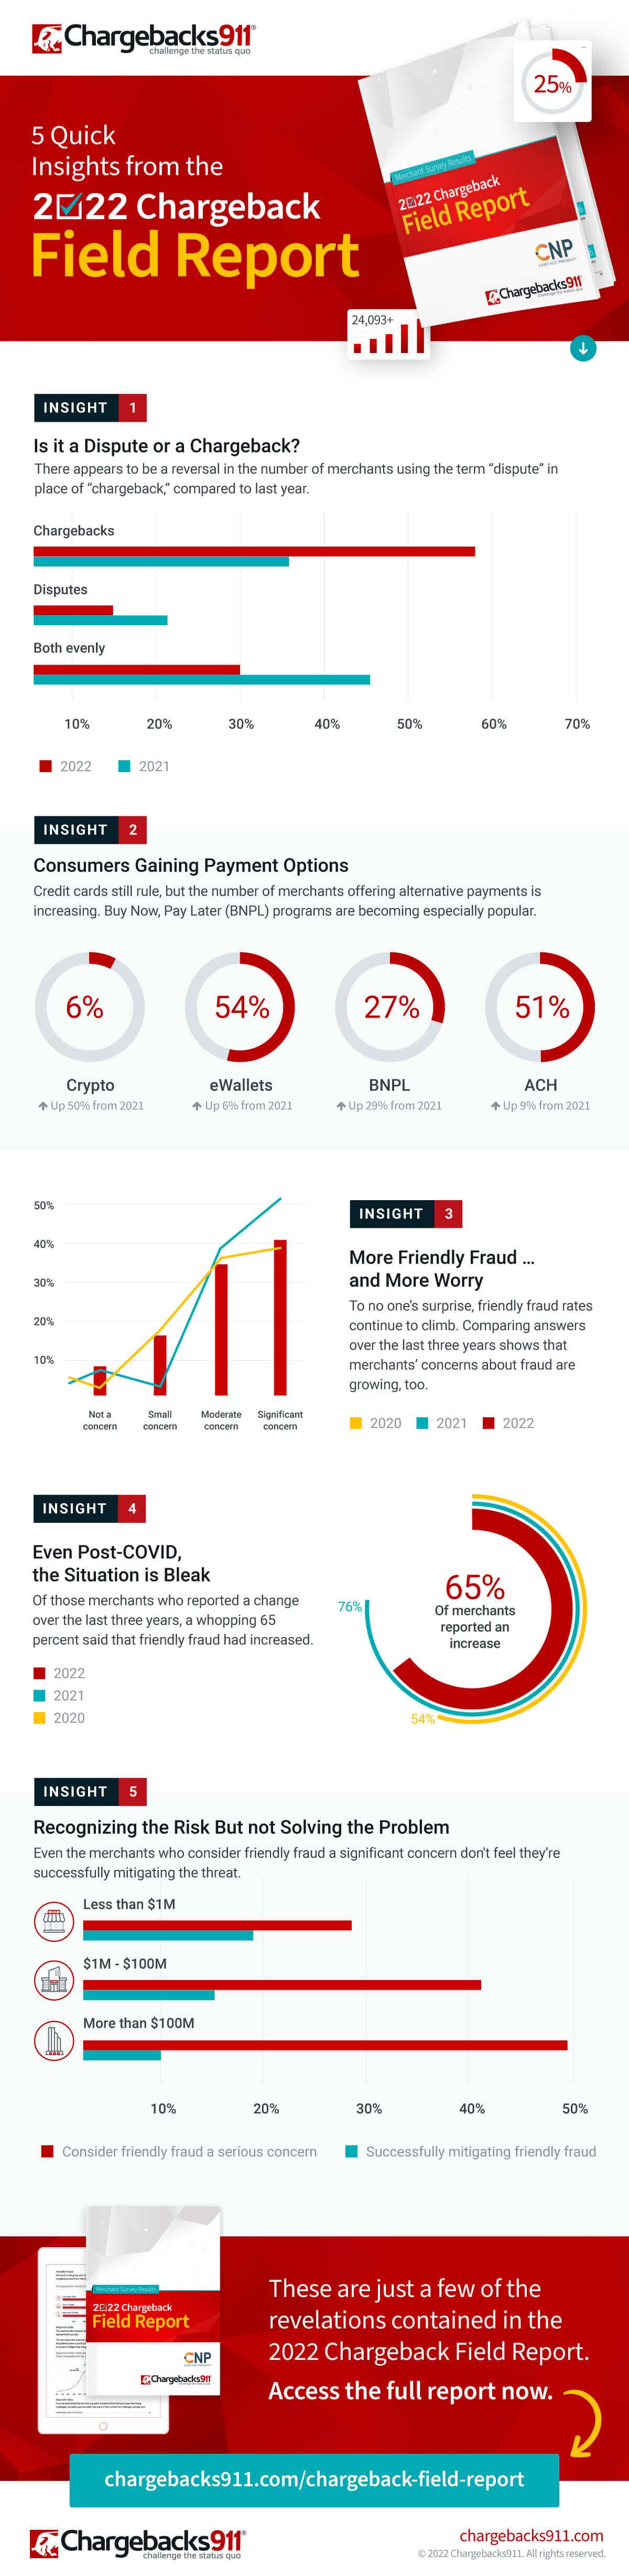 Chargeback Field Report Infographic 2022